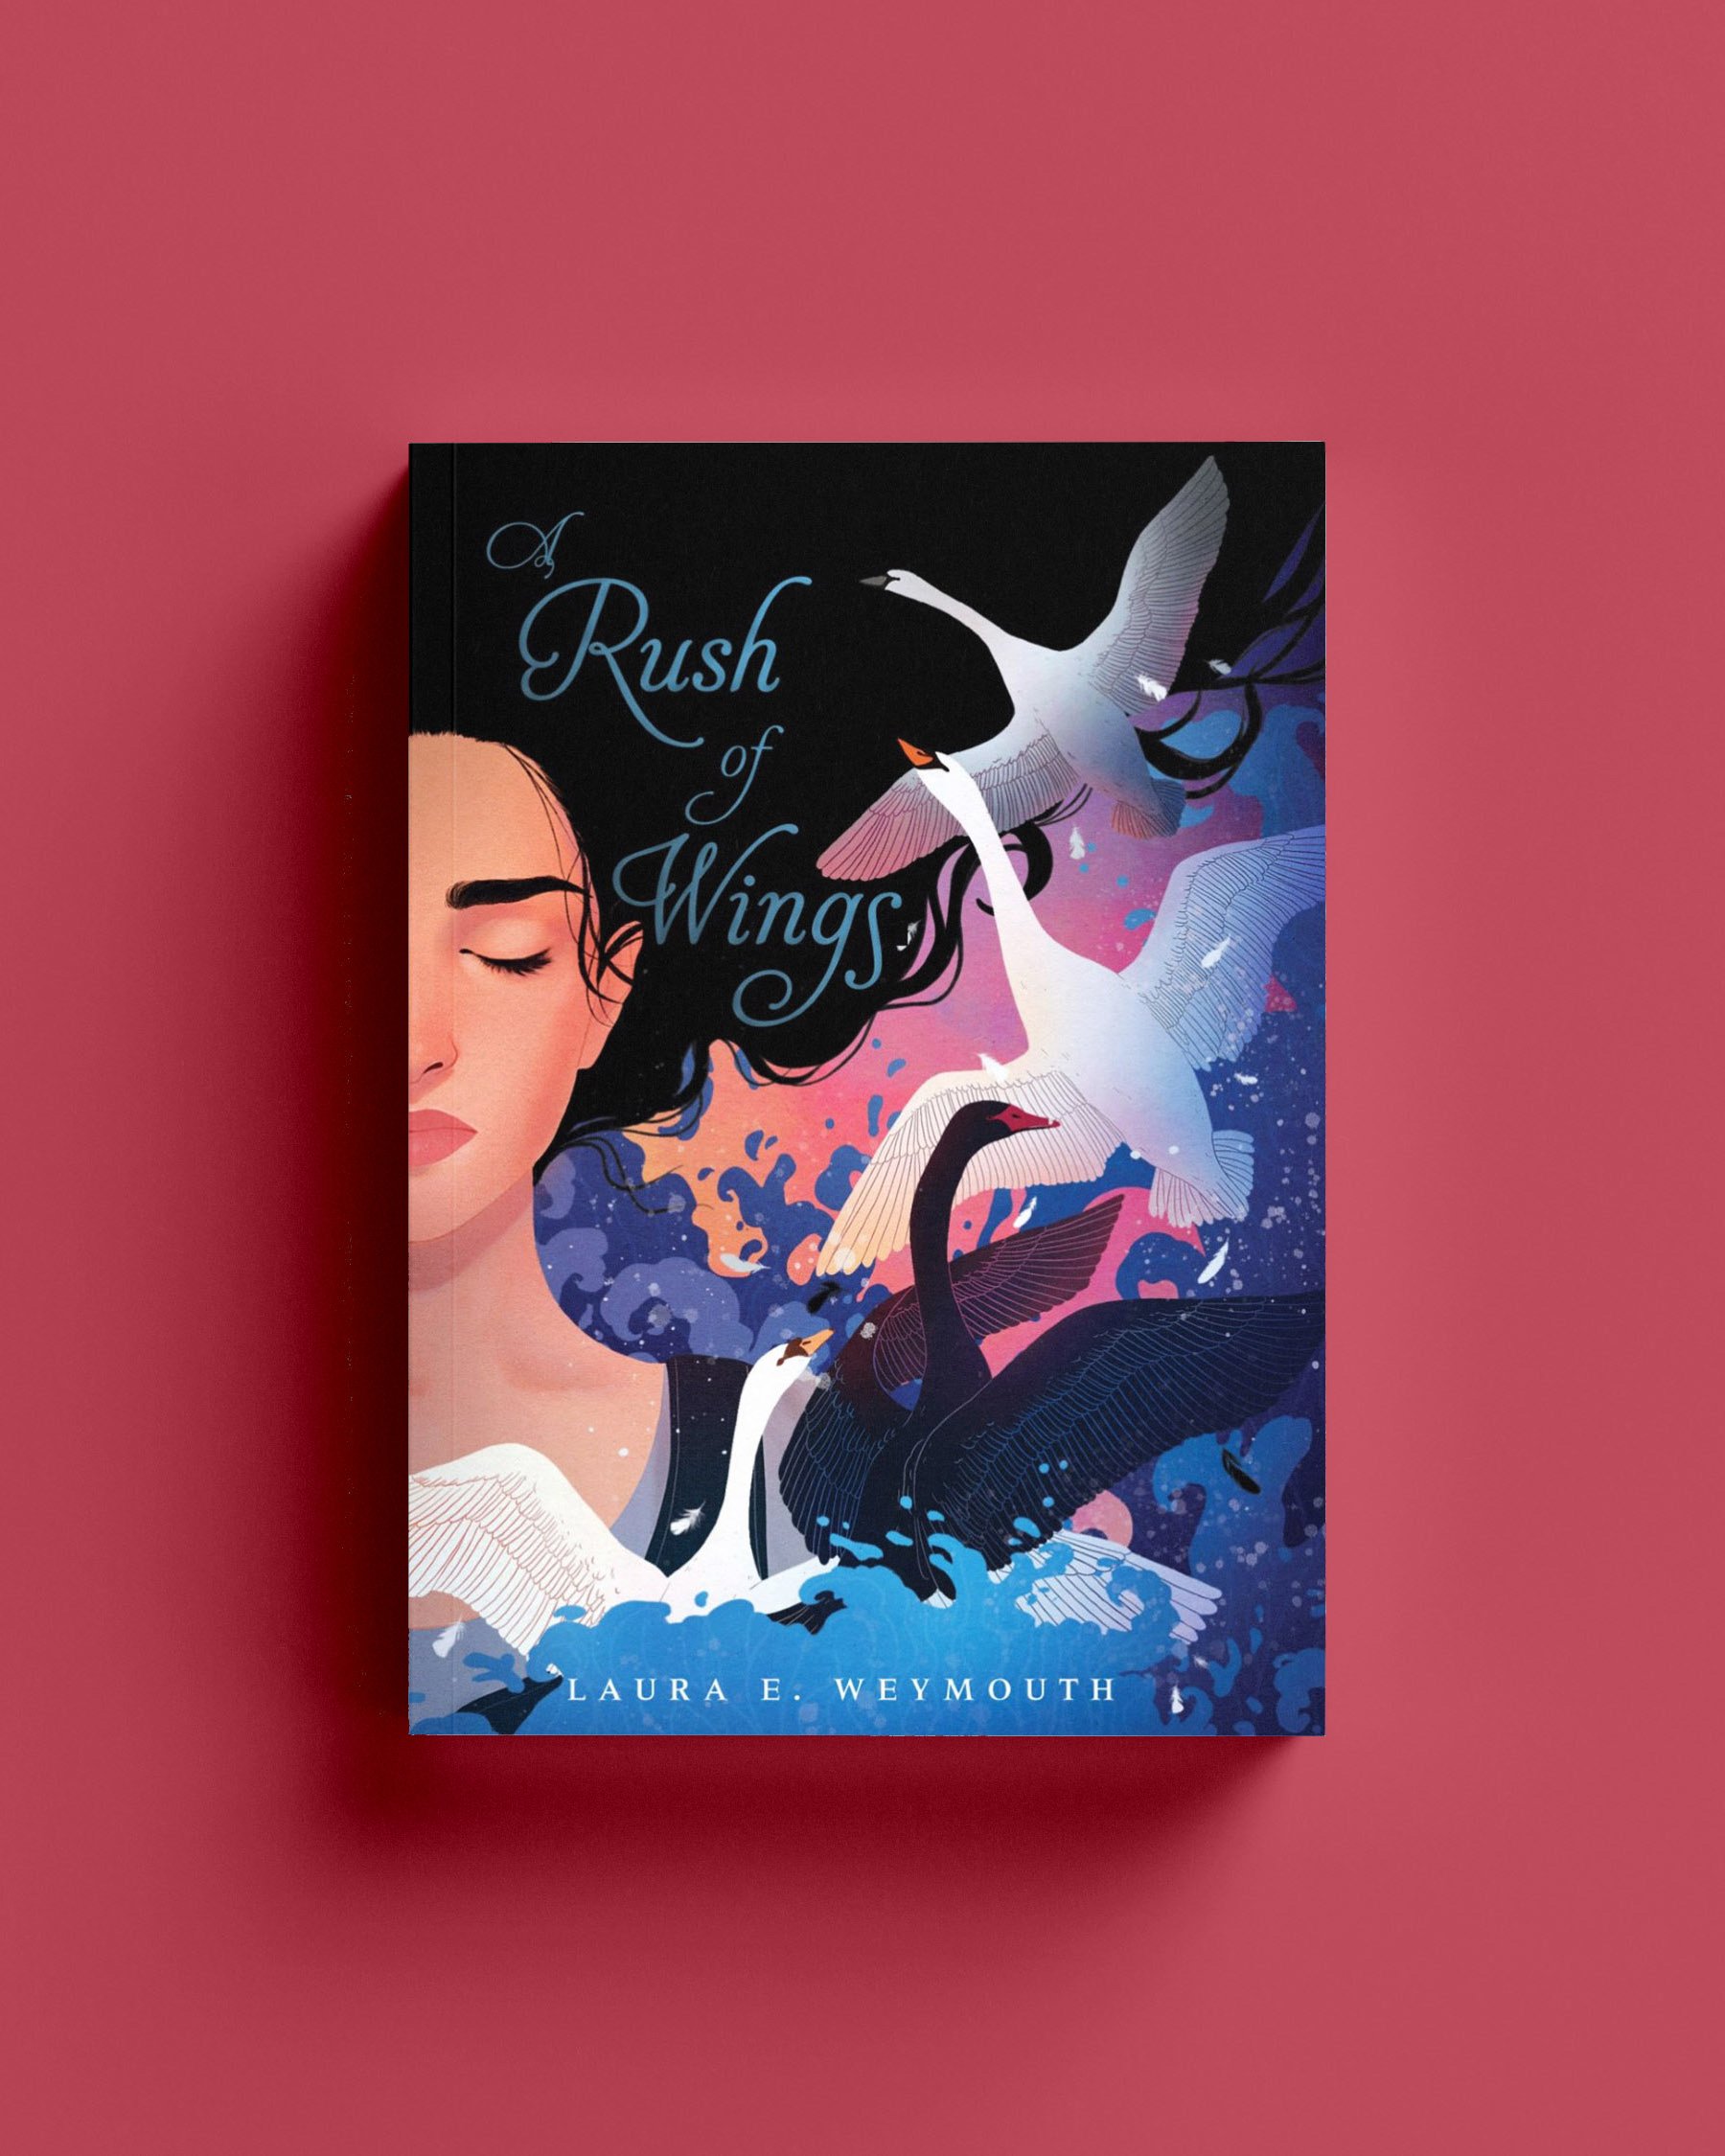 Cover for "A Rush of Wings" by Laura E. Weymouth